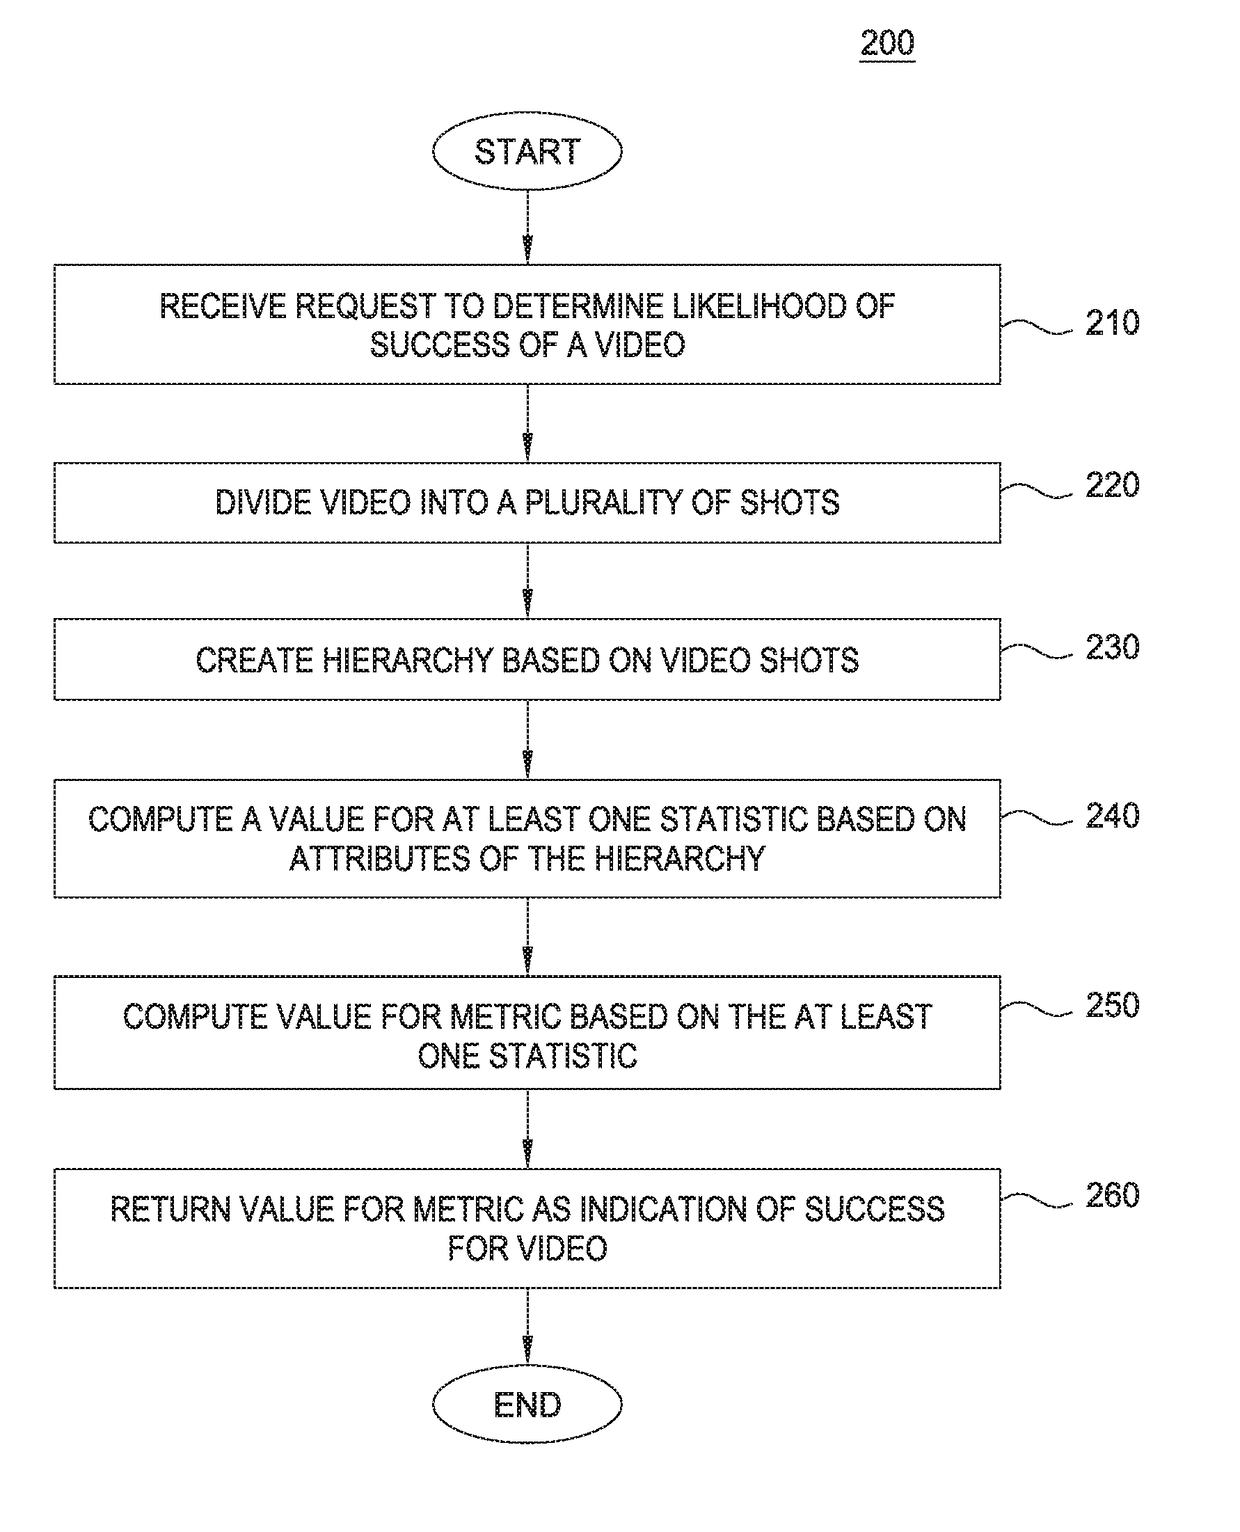 Shot structure of online video as a predictor of success